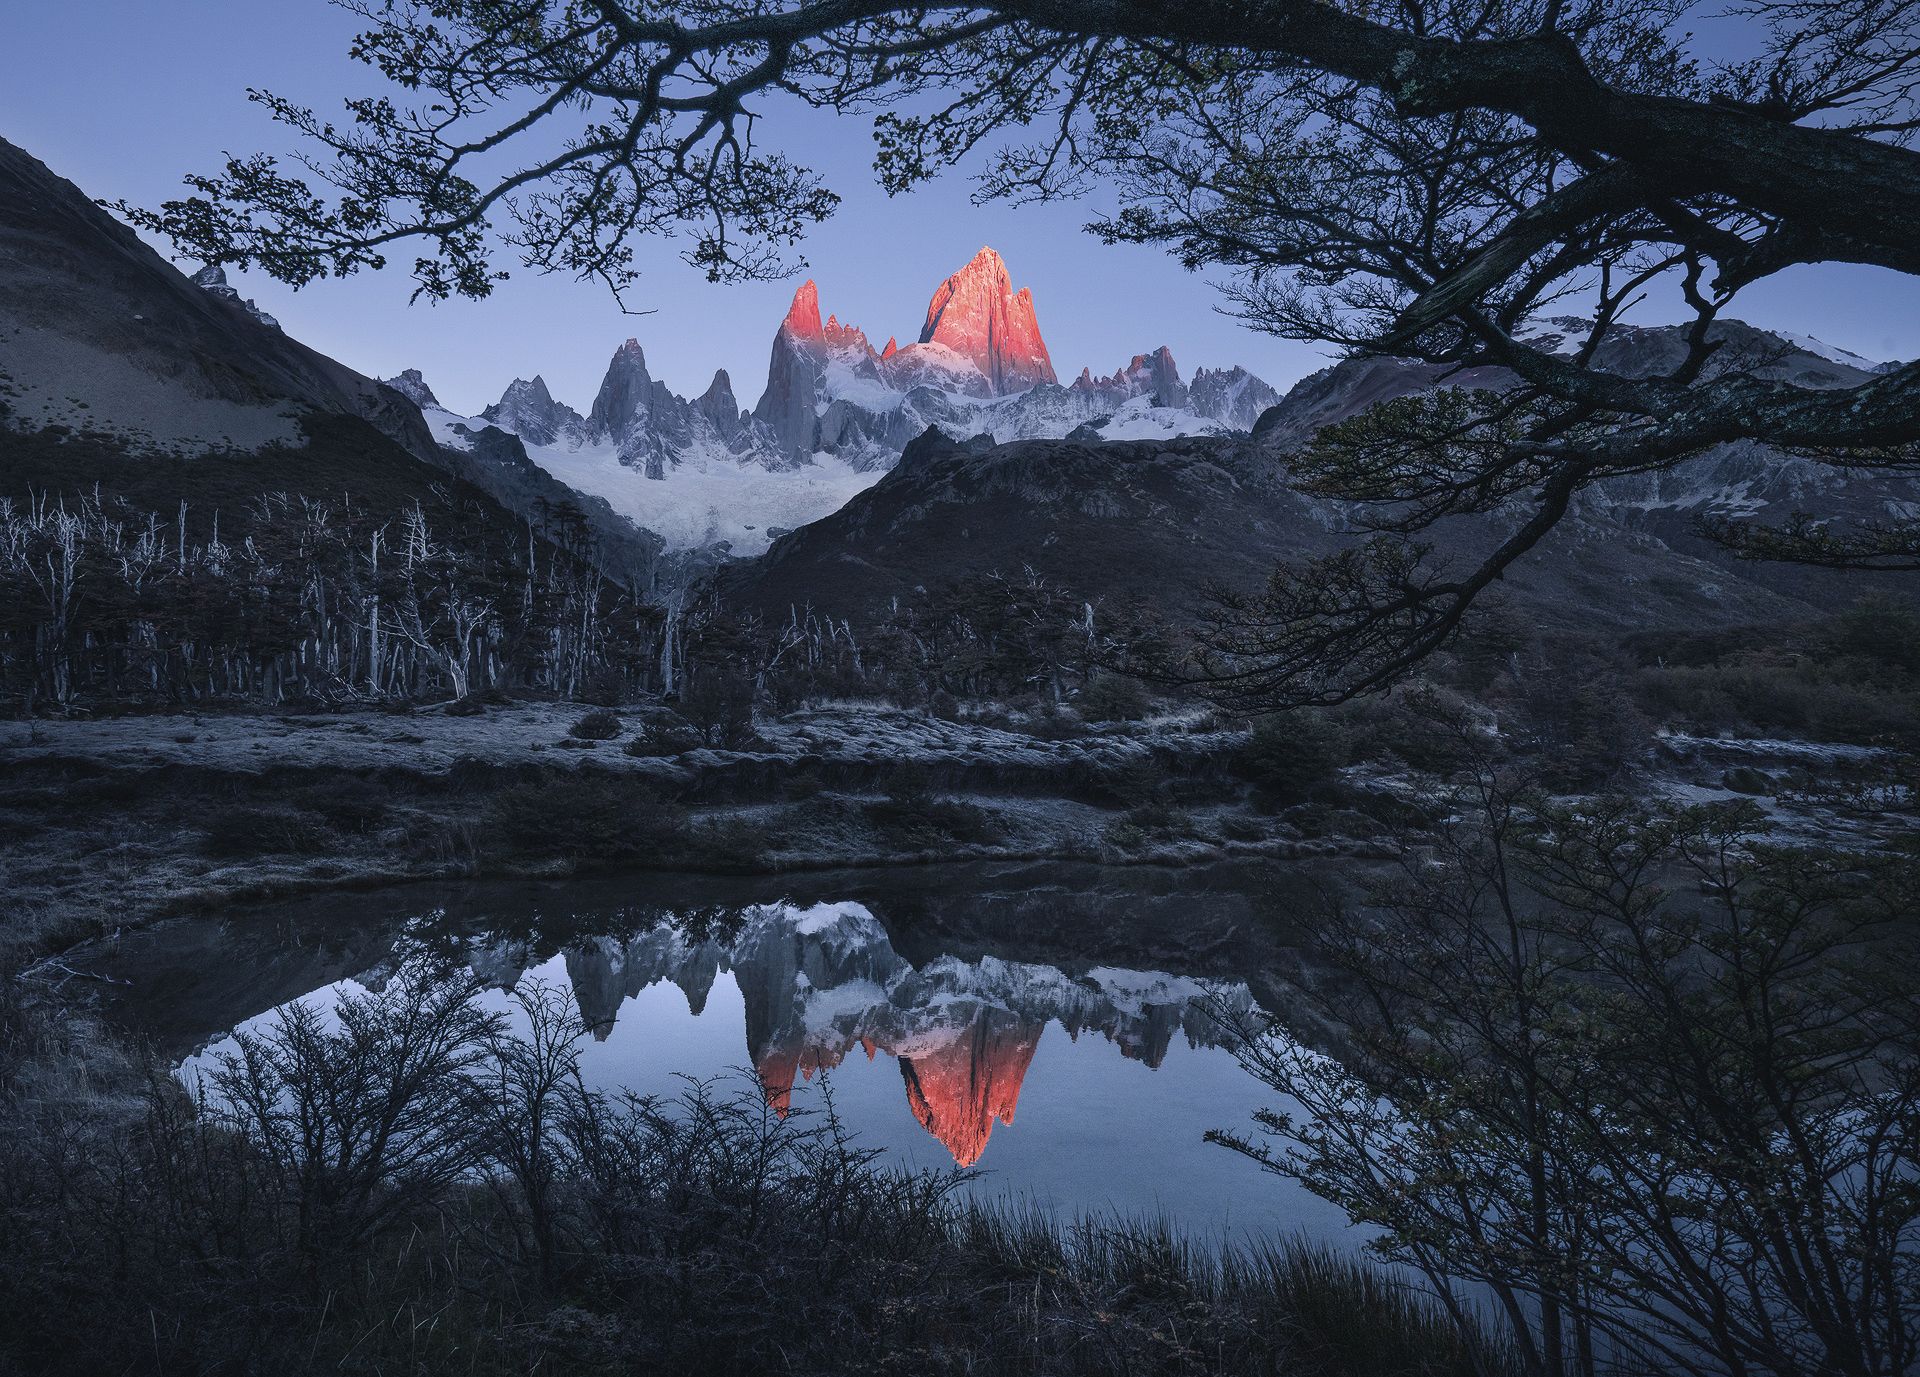 EL VALLE PERDIDO - Ramiro Torrents (Argentina) - Highly Commended MOUNTAIN LANDSCAPE.jpg